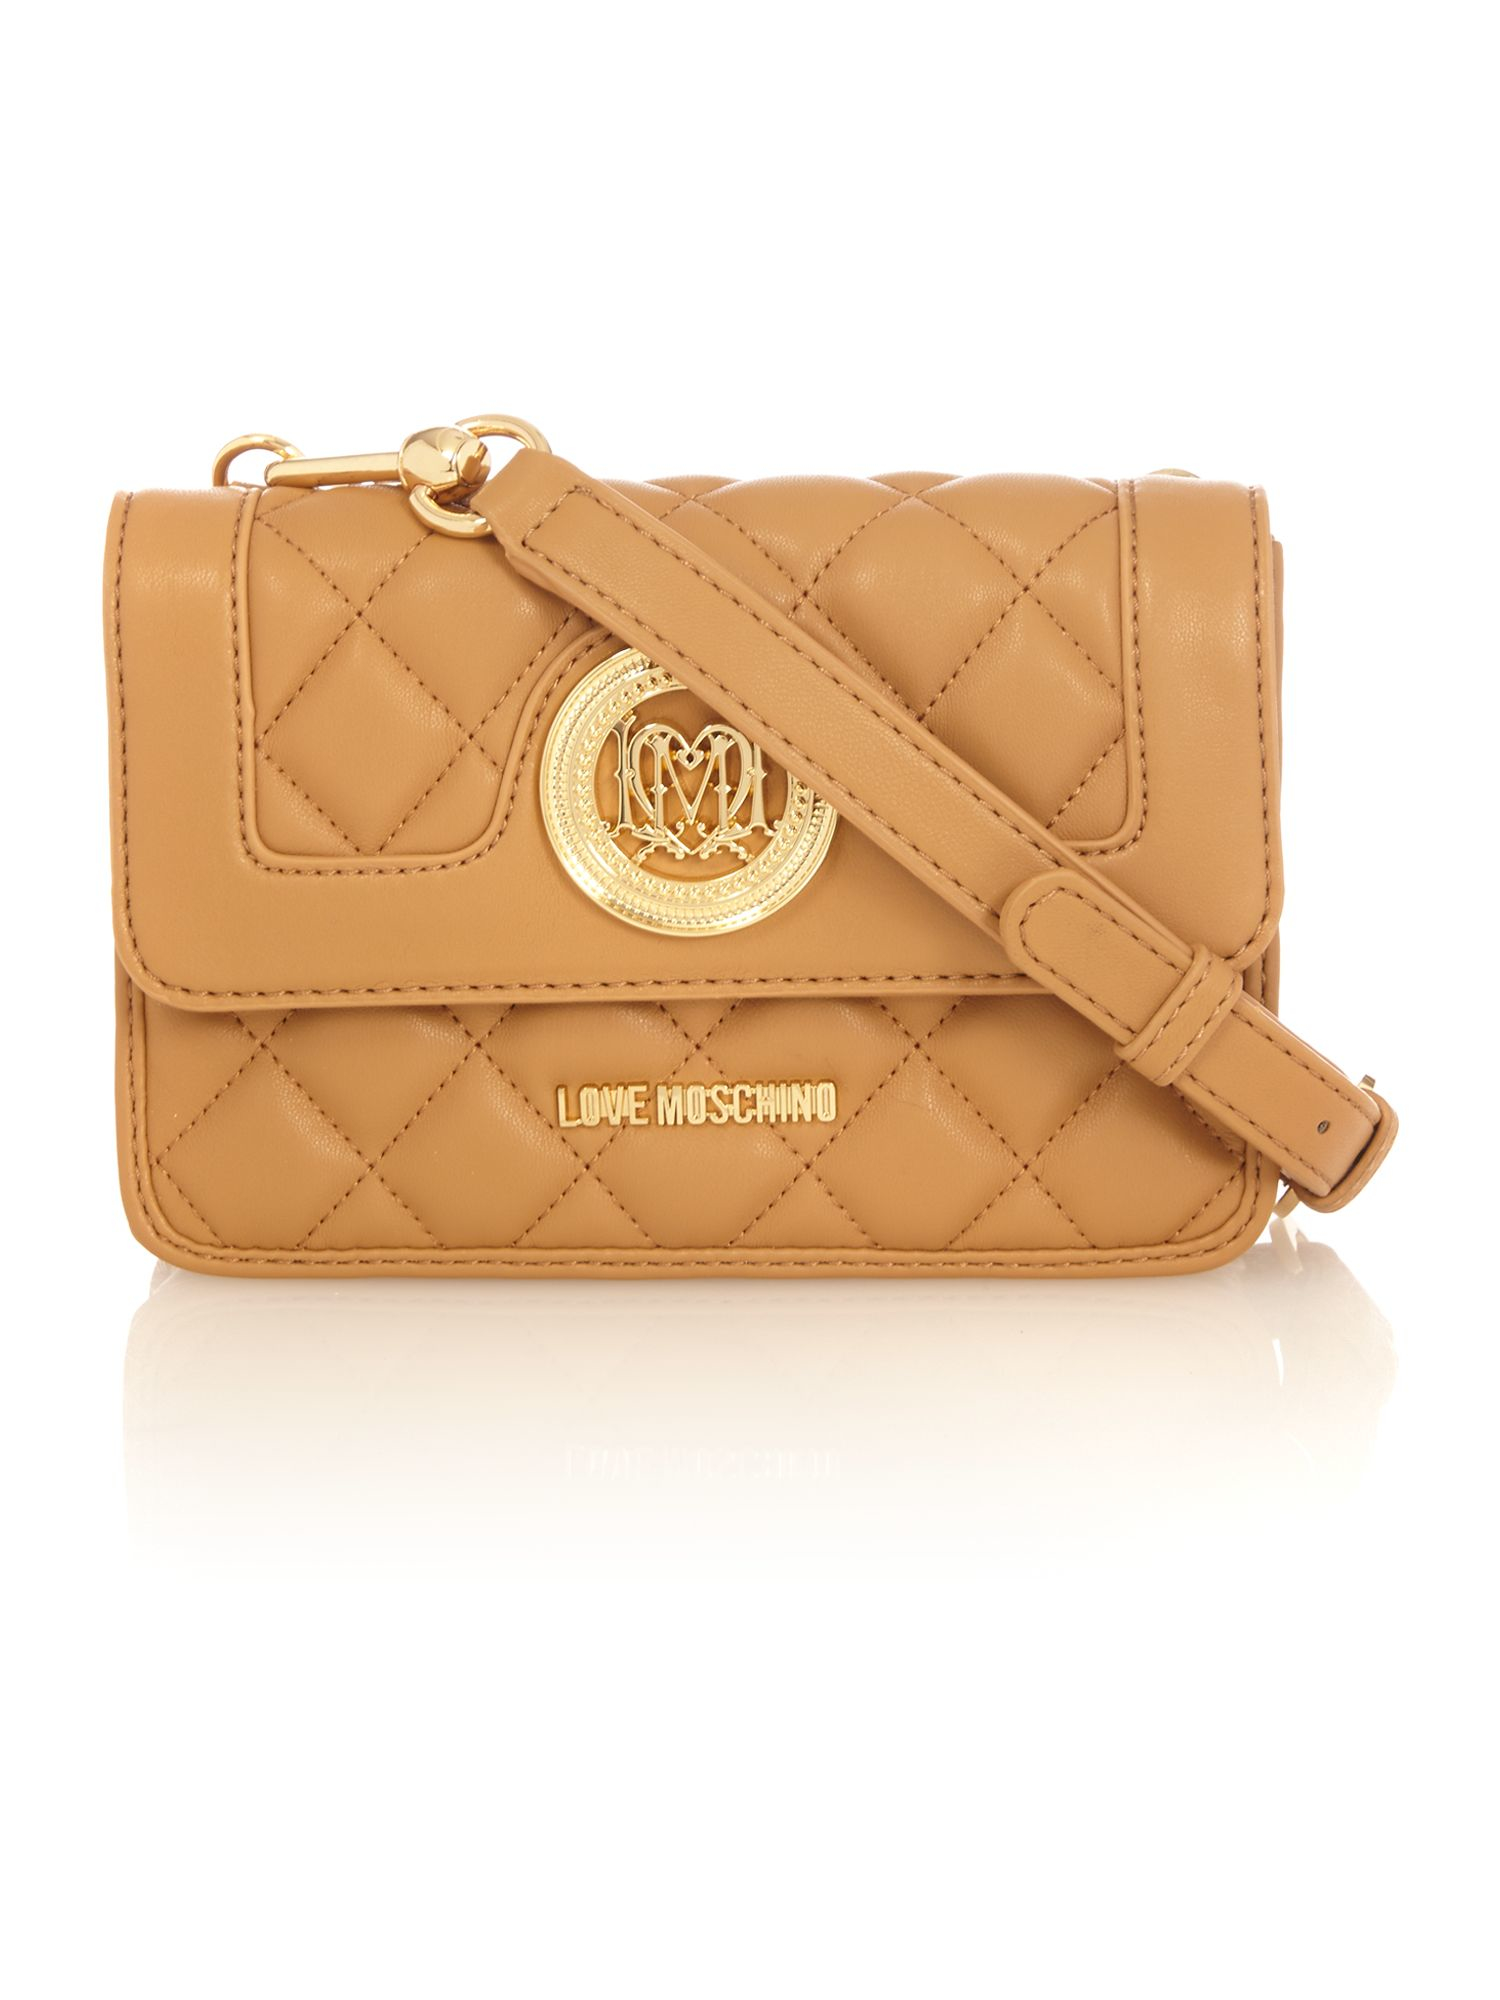 Love Moschino Superquilt Tan Small Crossbody Bag in Brown - Lyst